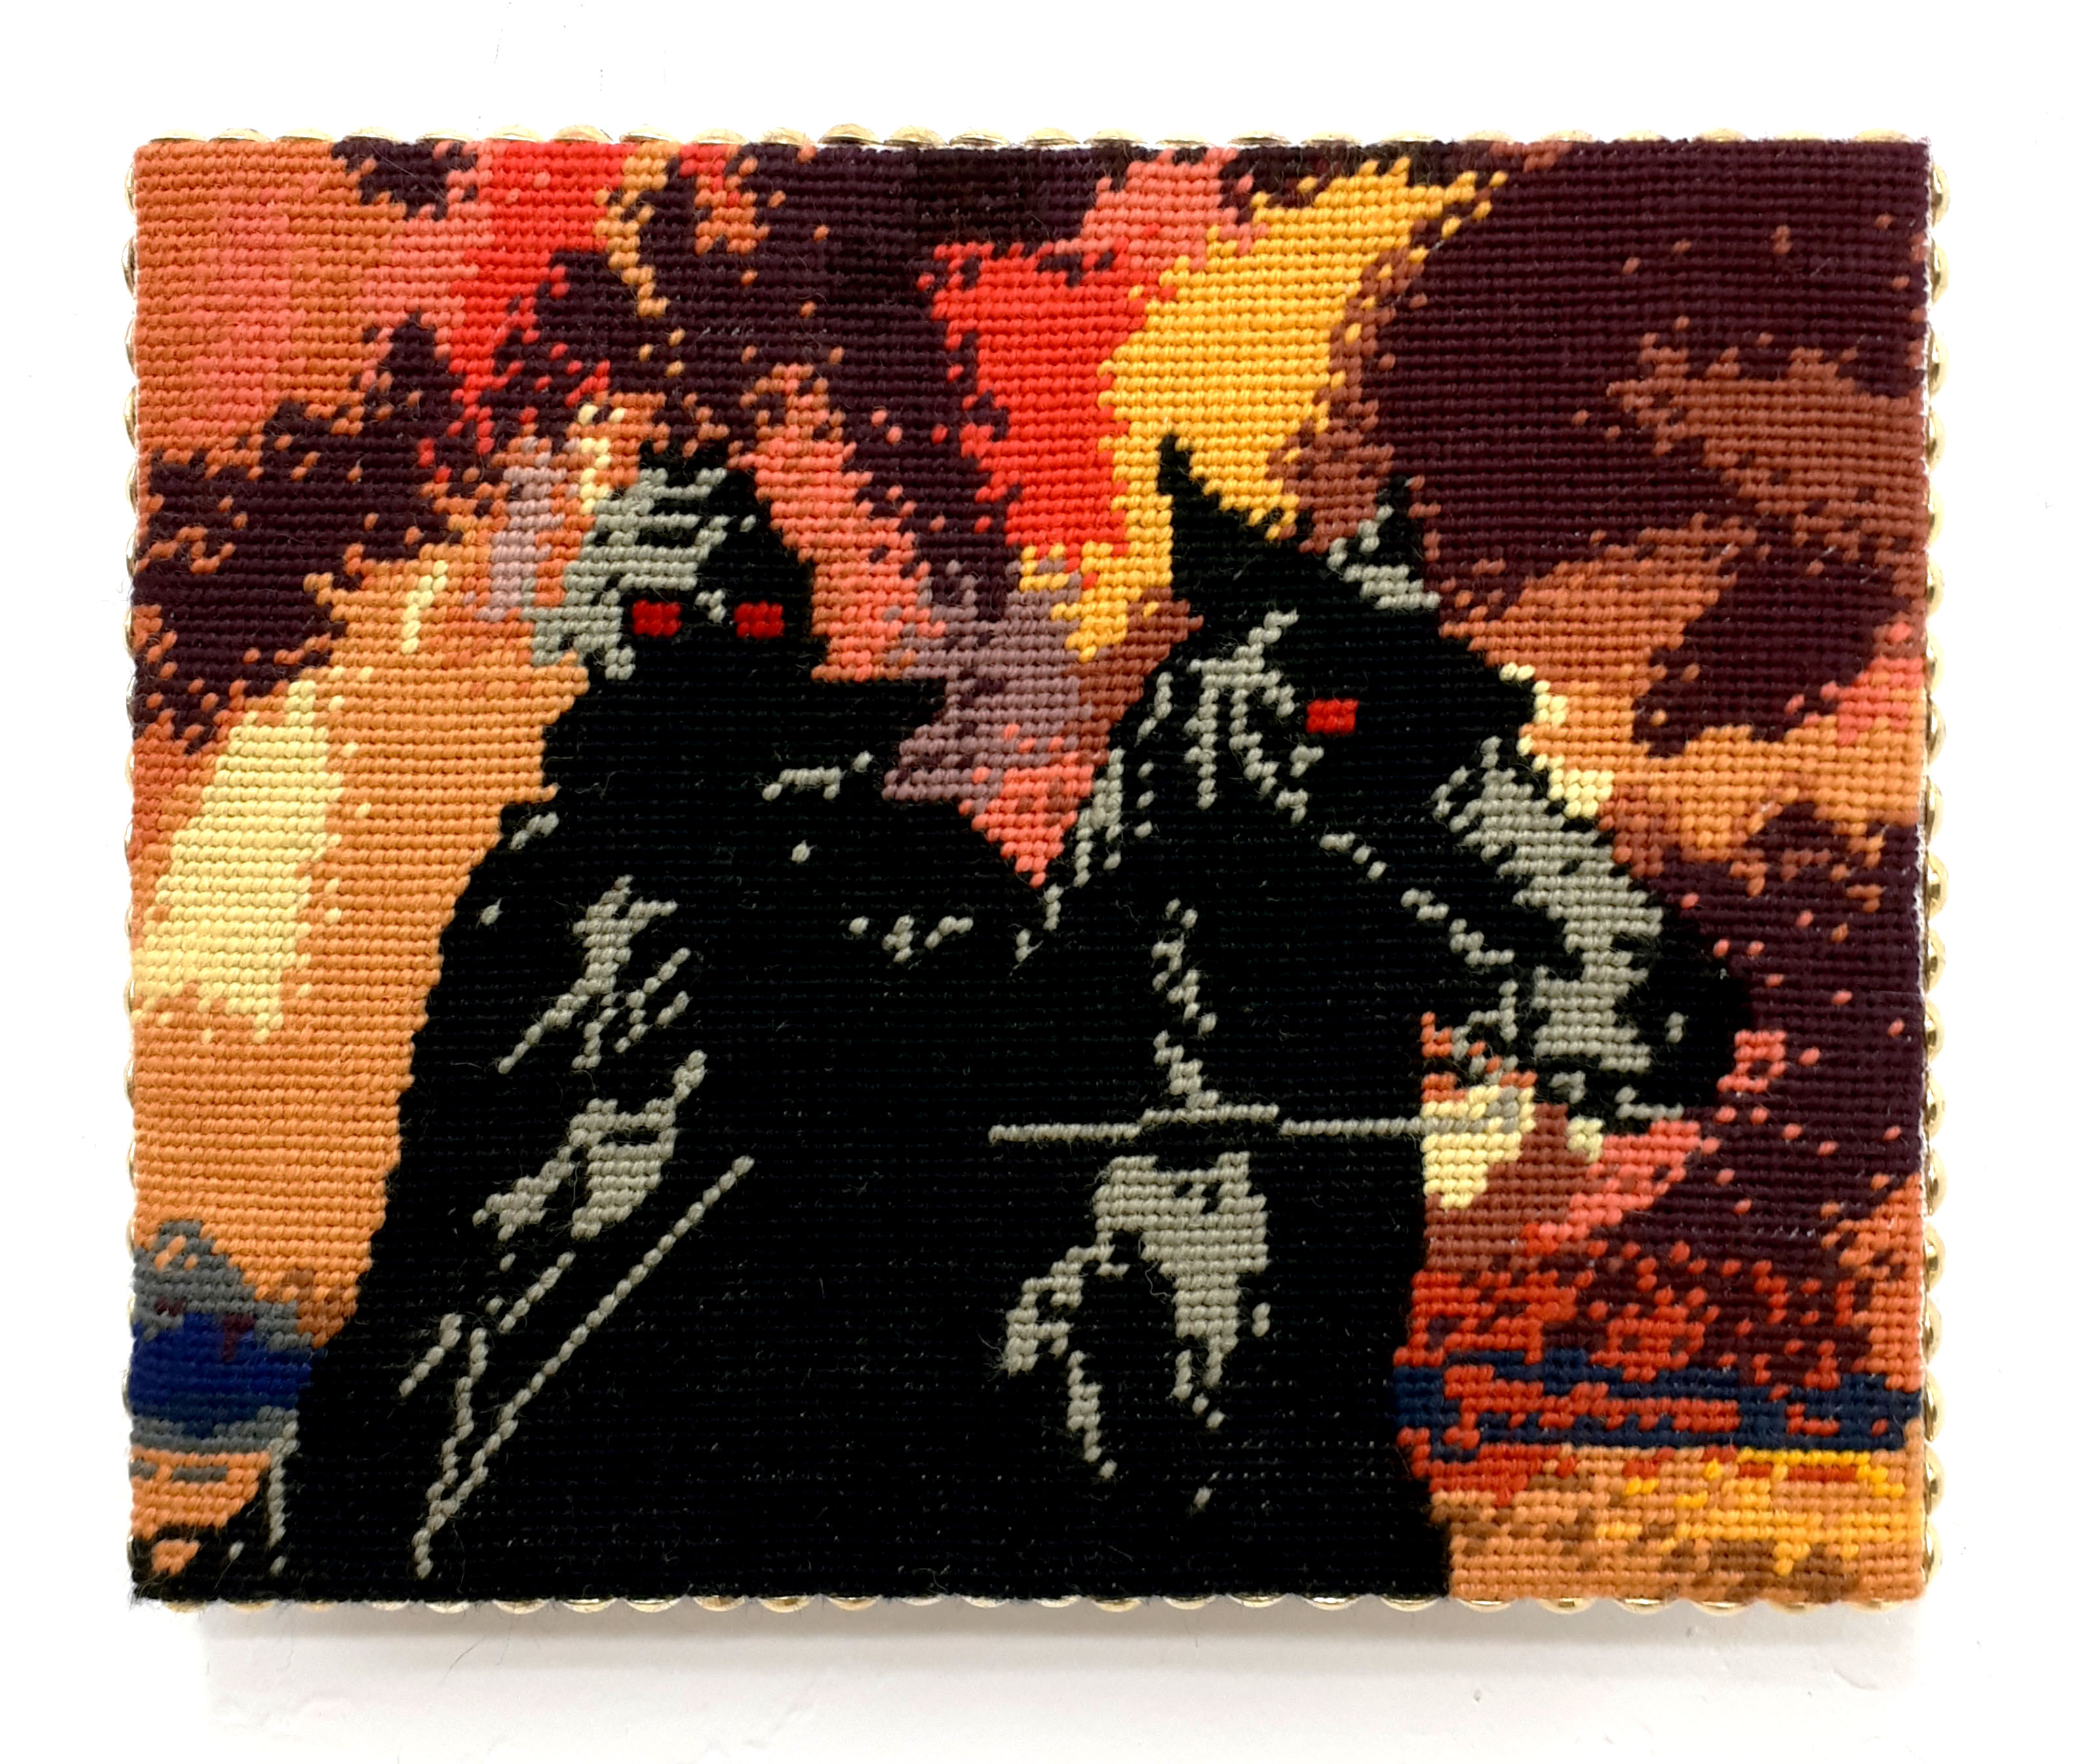  / Needlepoint inspired from a scene in *The Lord of the Rings* by Ralph Bakshi, a Nazgûl and his horse. Art by artist Marine Beaufils.